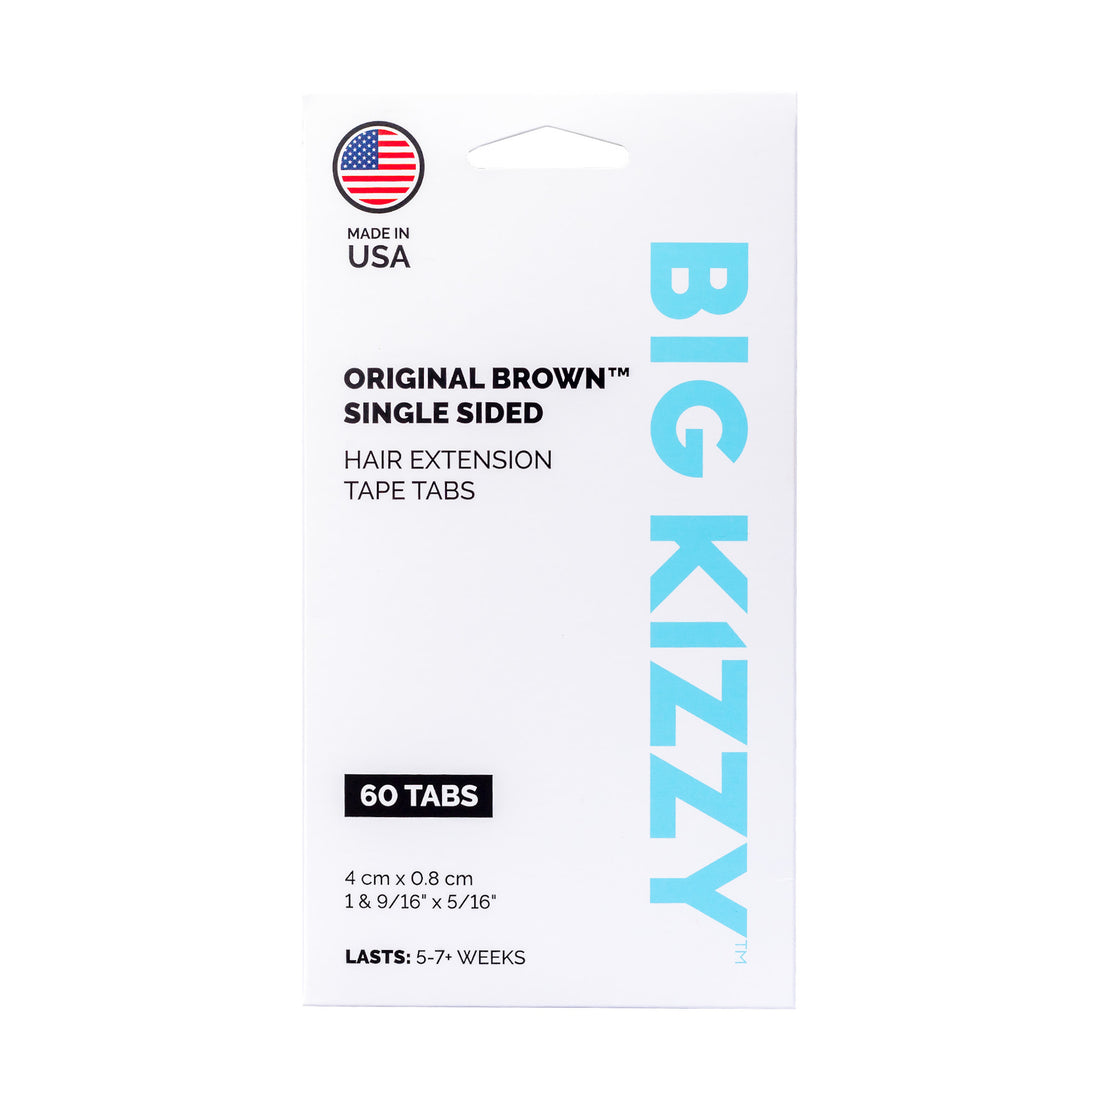 A pack of Big Kizzy® Original Brown Single Sided Hair Extension Replacement Tape Tabs, 60 tabs